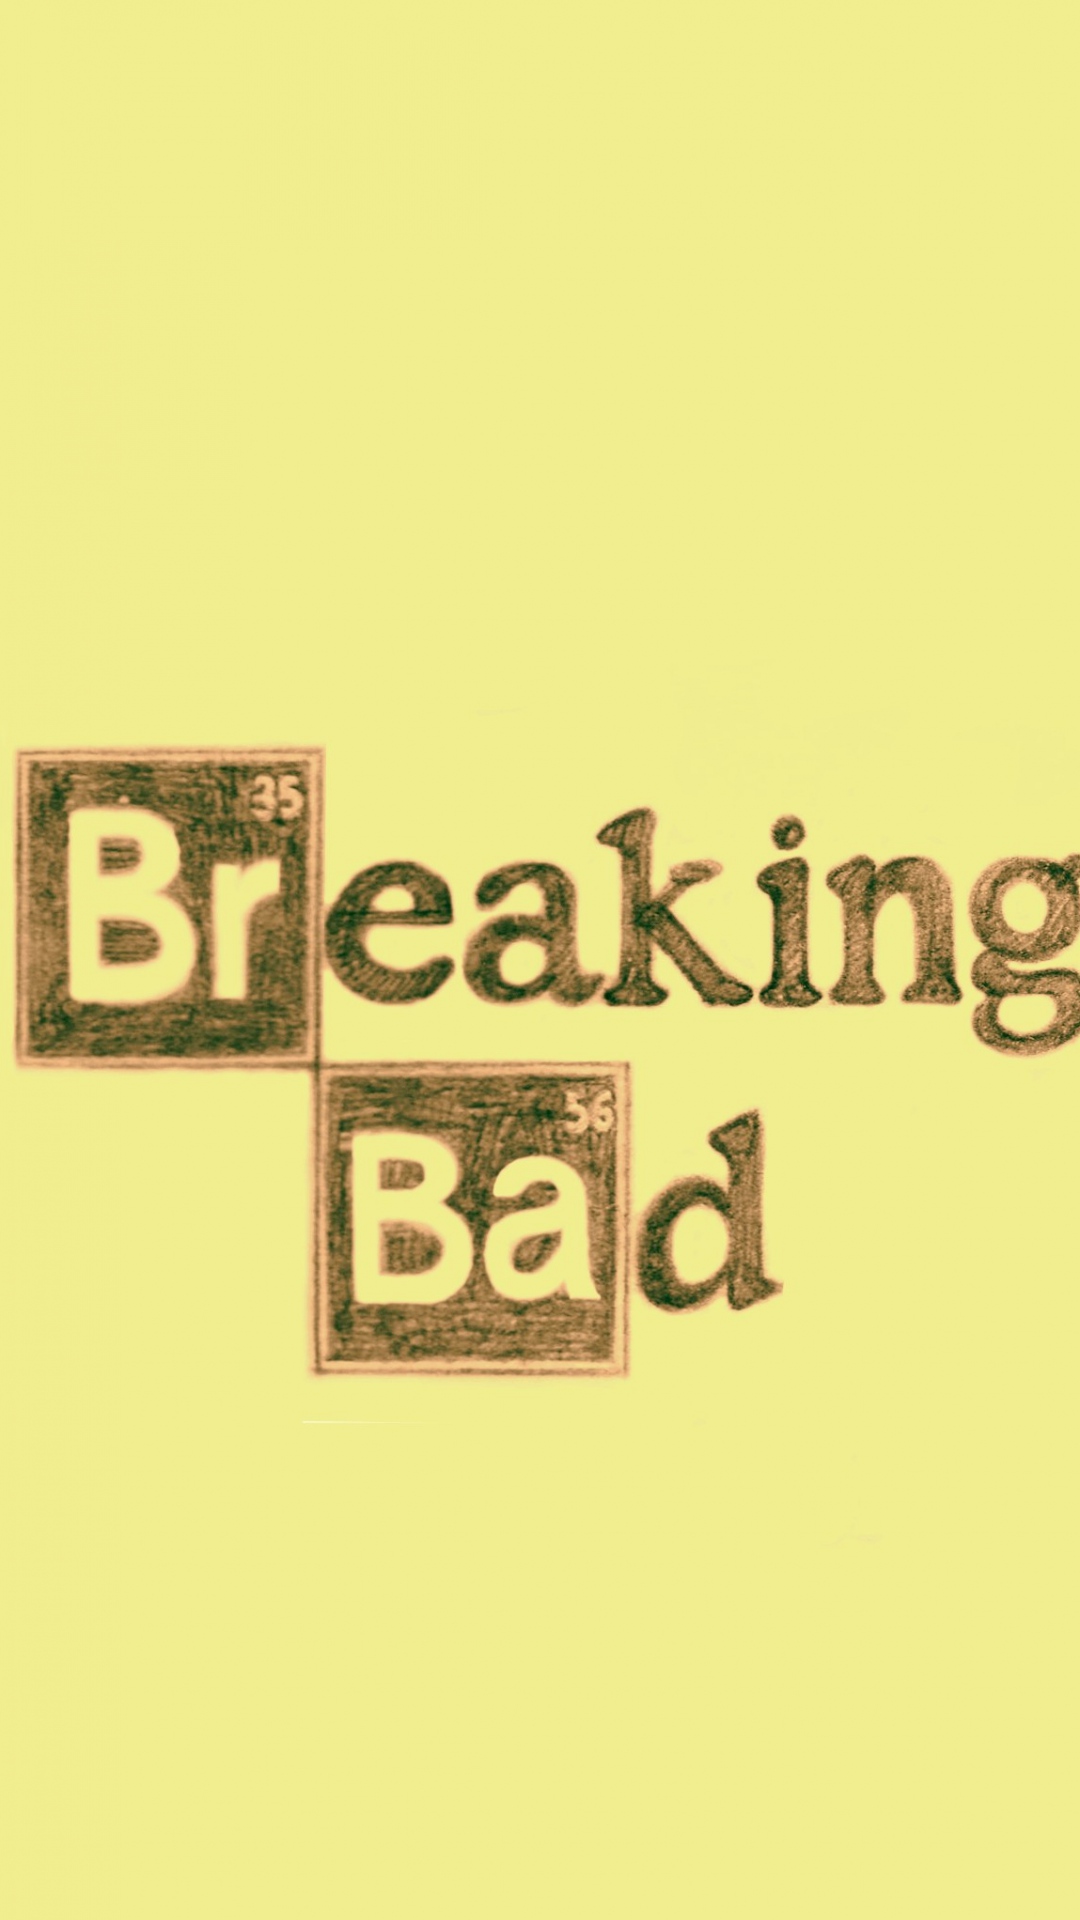 Breaking bad wallpapers for iphone free download